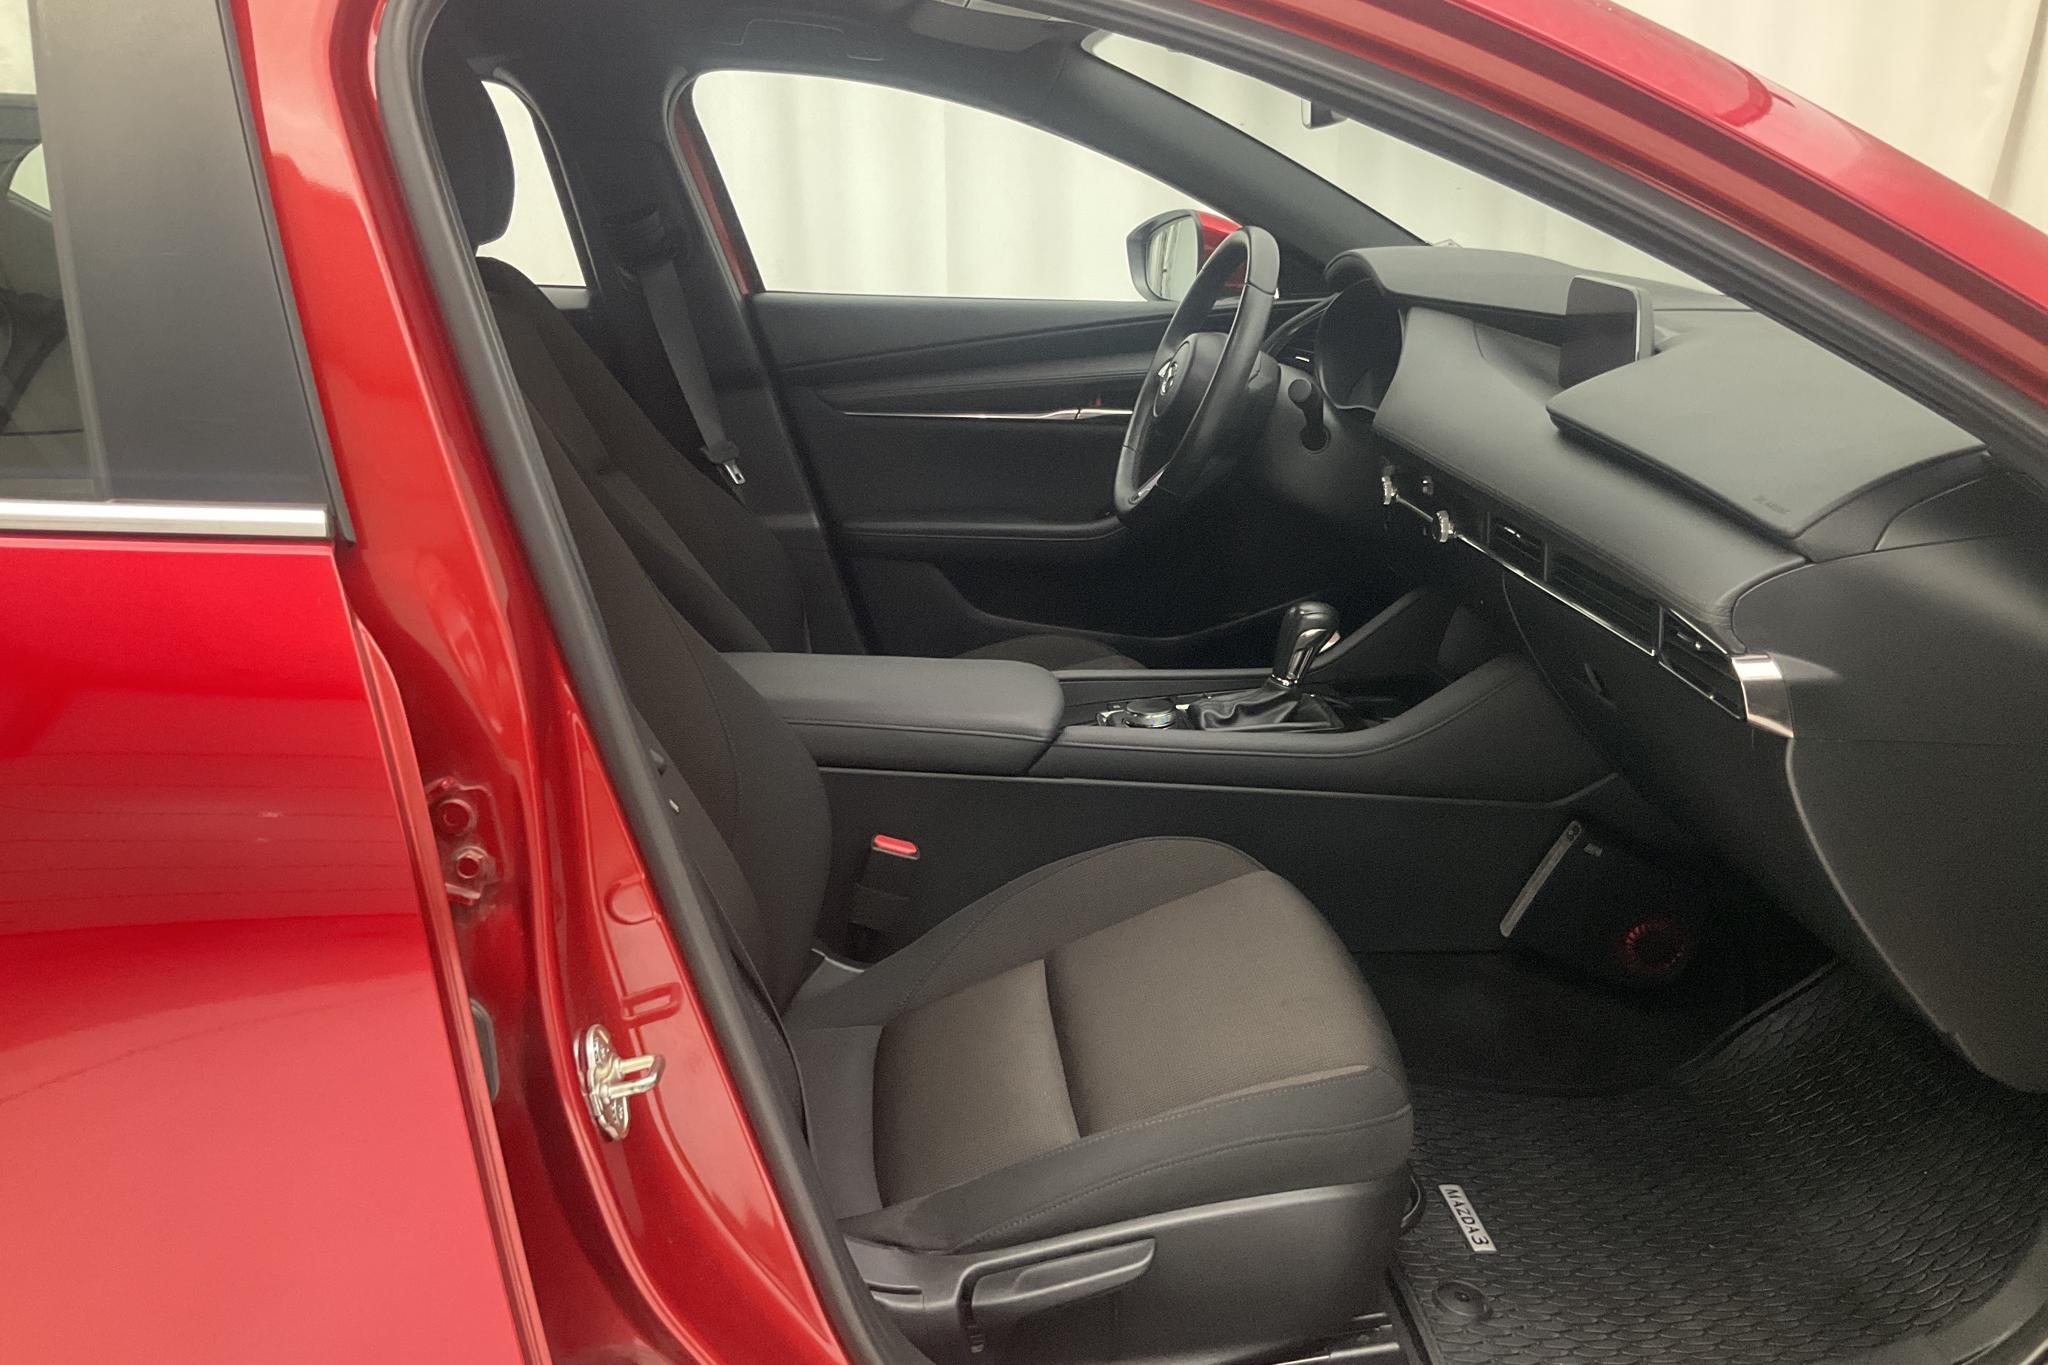 Mazda 3 2.0 5dr (122hk) - 56 180 km - Automatic - red - 2019